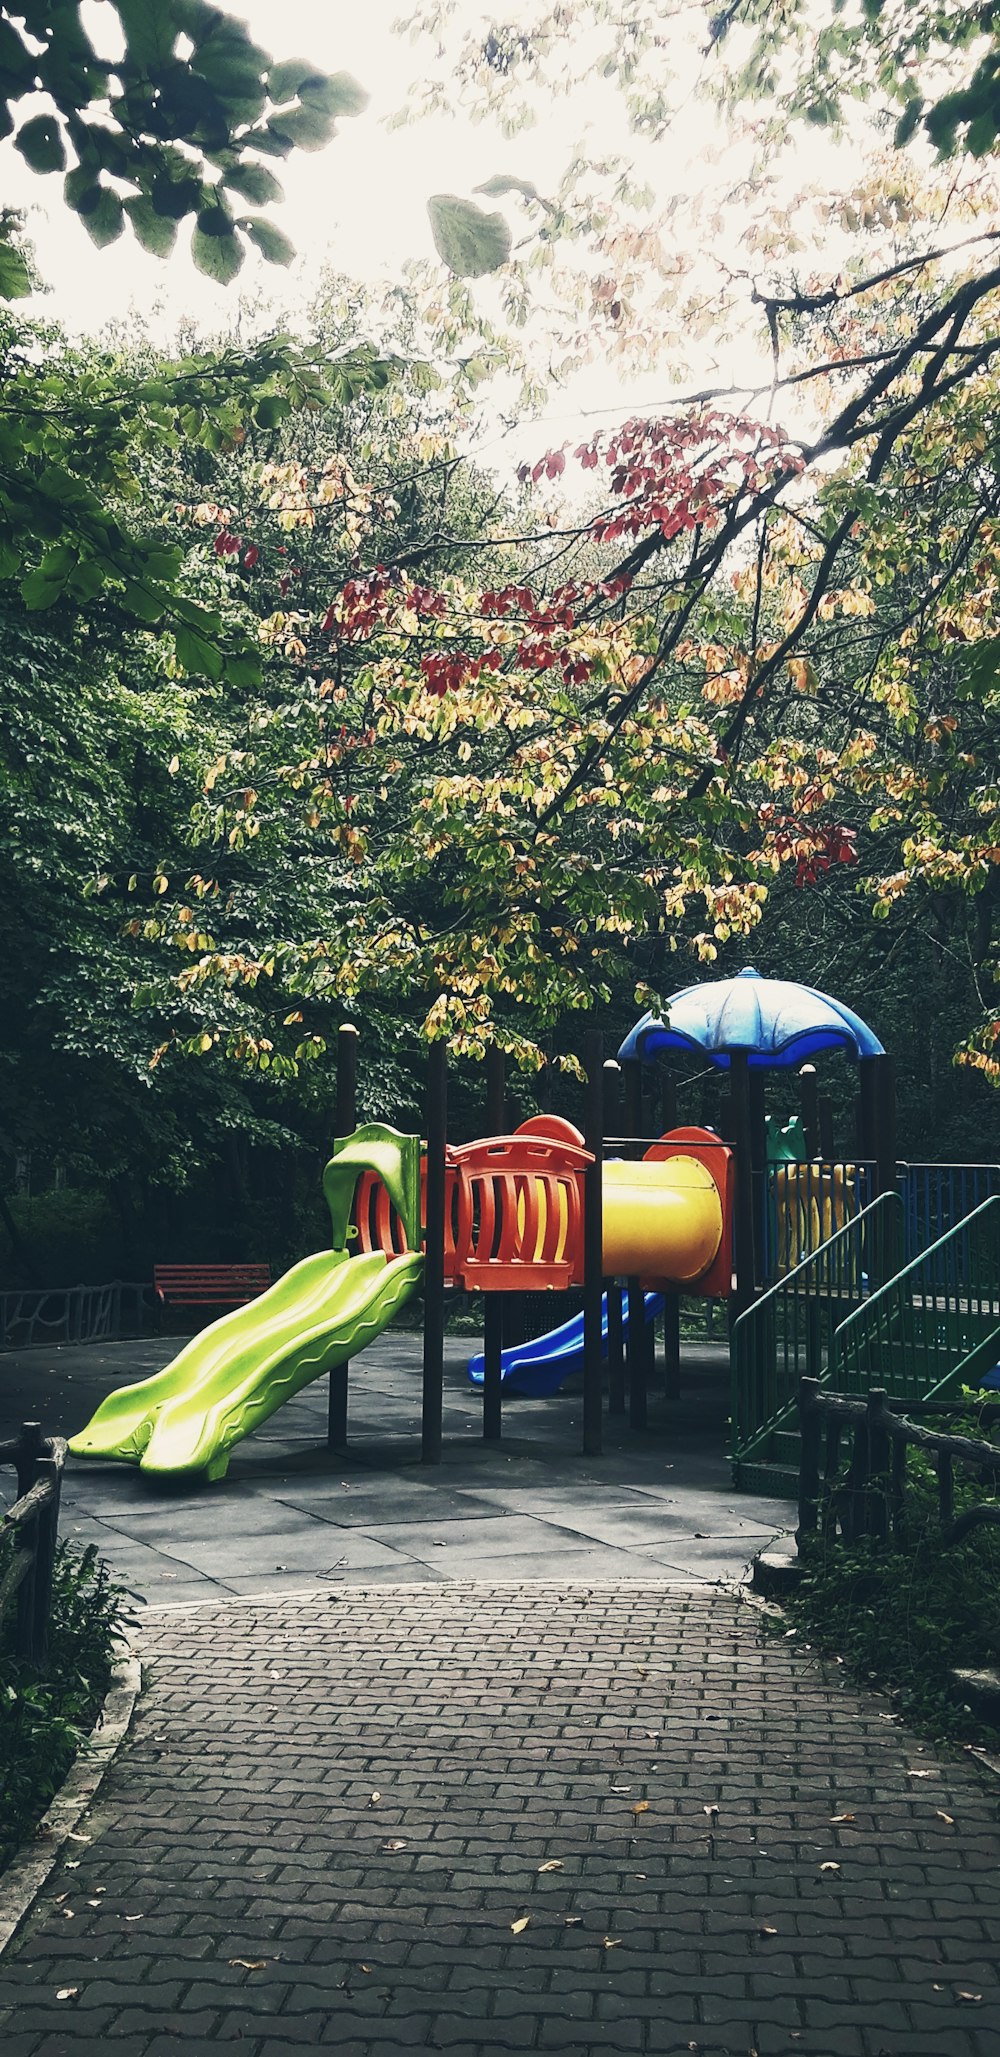 a children's play area with a slide and umbrellas